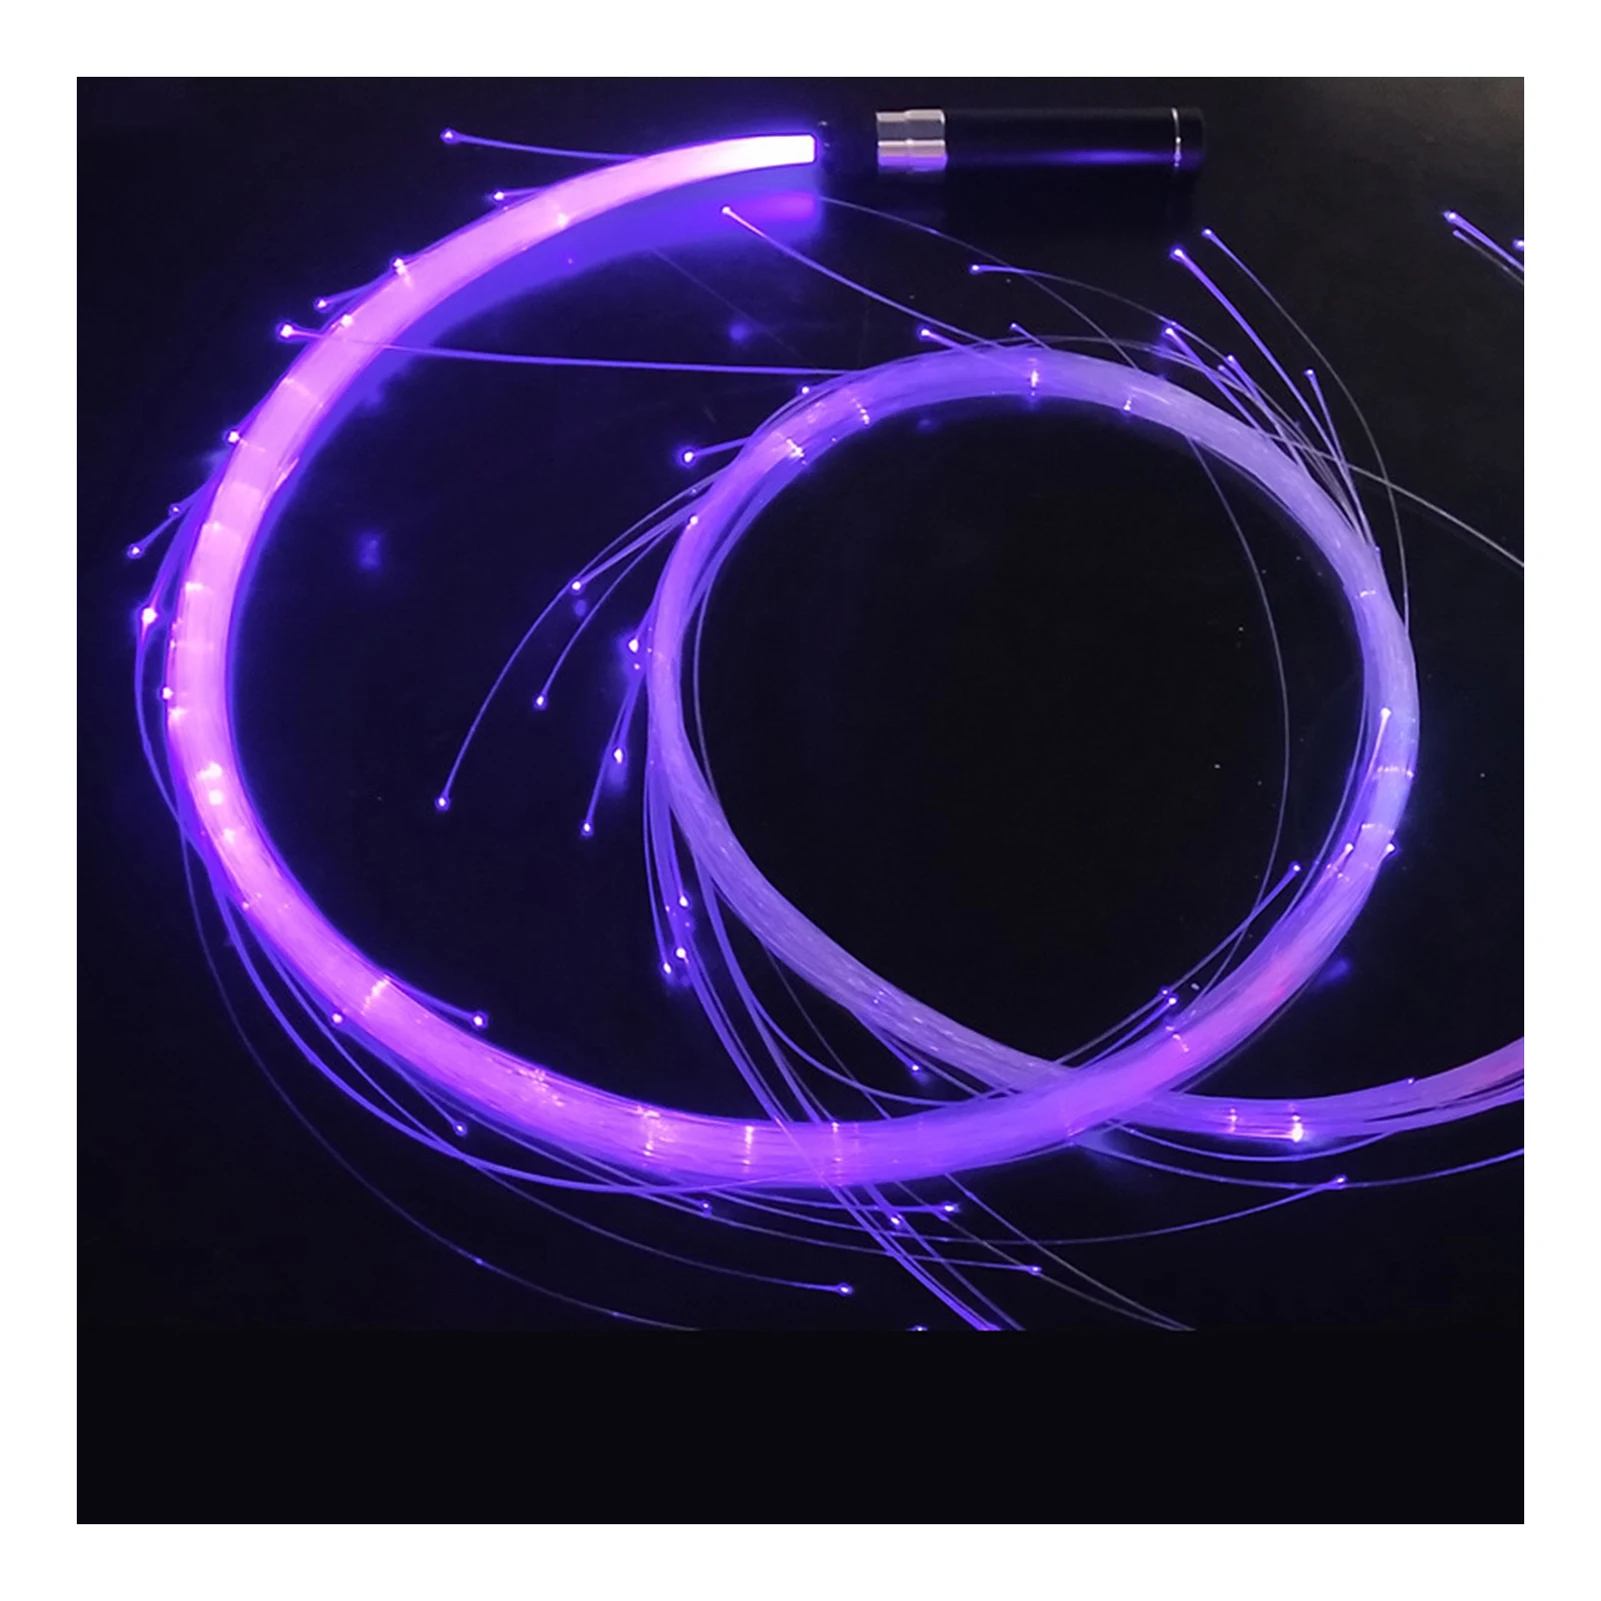 

Dance LED Fiber Optic Whip Freely Swing the Whip 360° Rotation Design for Raves Parties Concerts